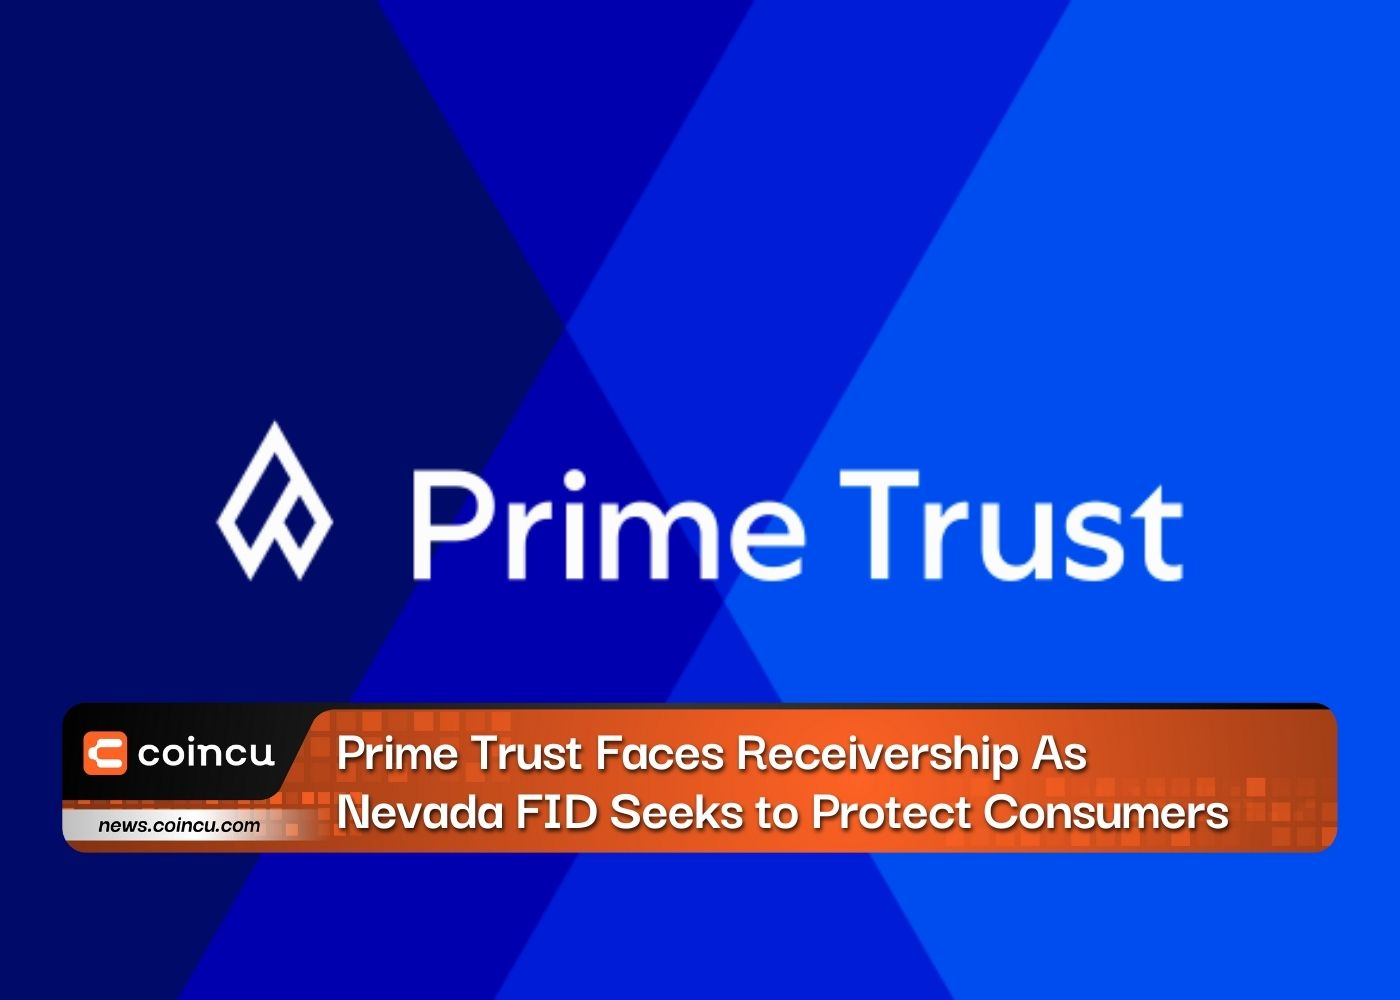 Prime Trust Faces Receivership As Nevada FID Seeks to Protect Consumers